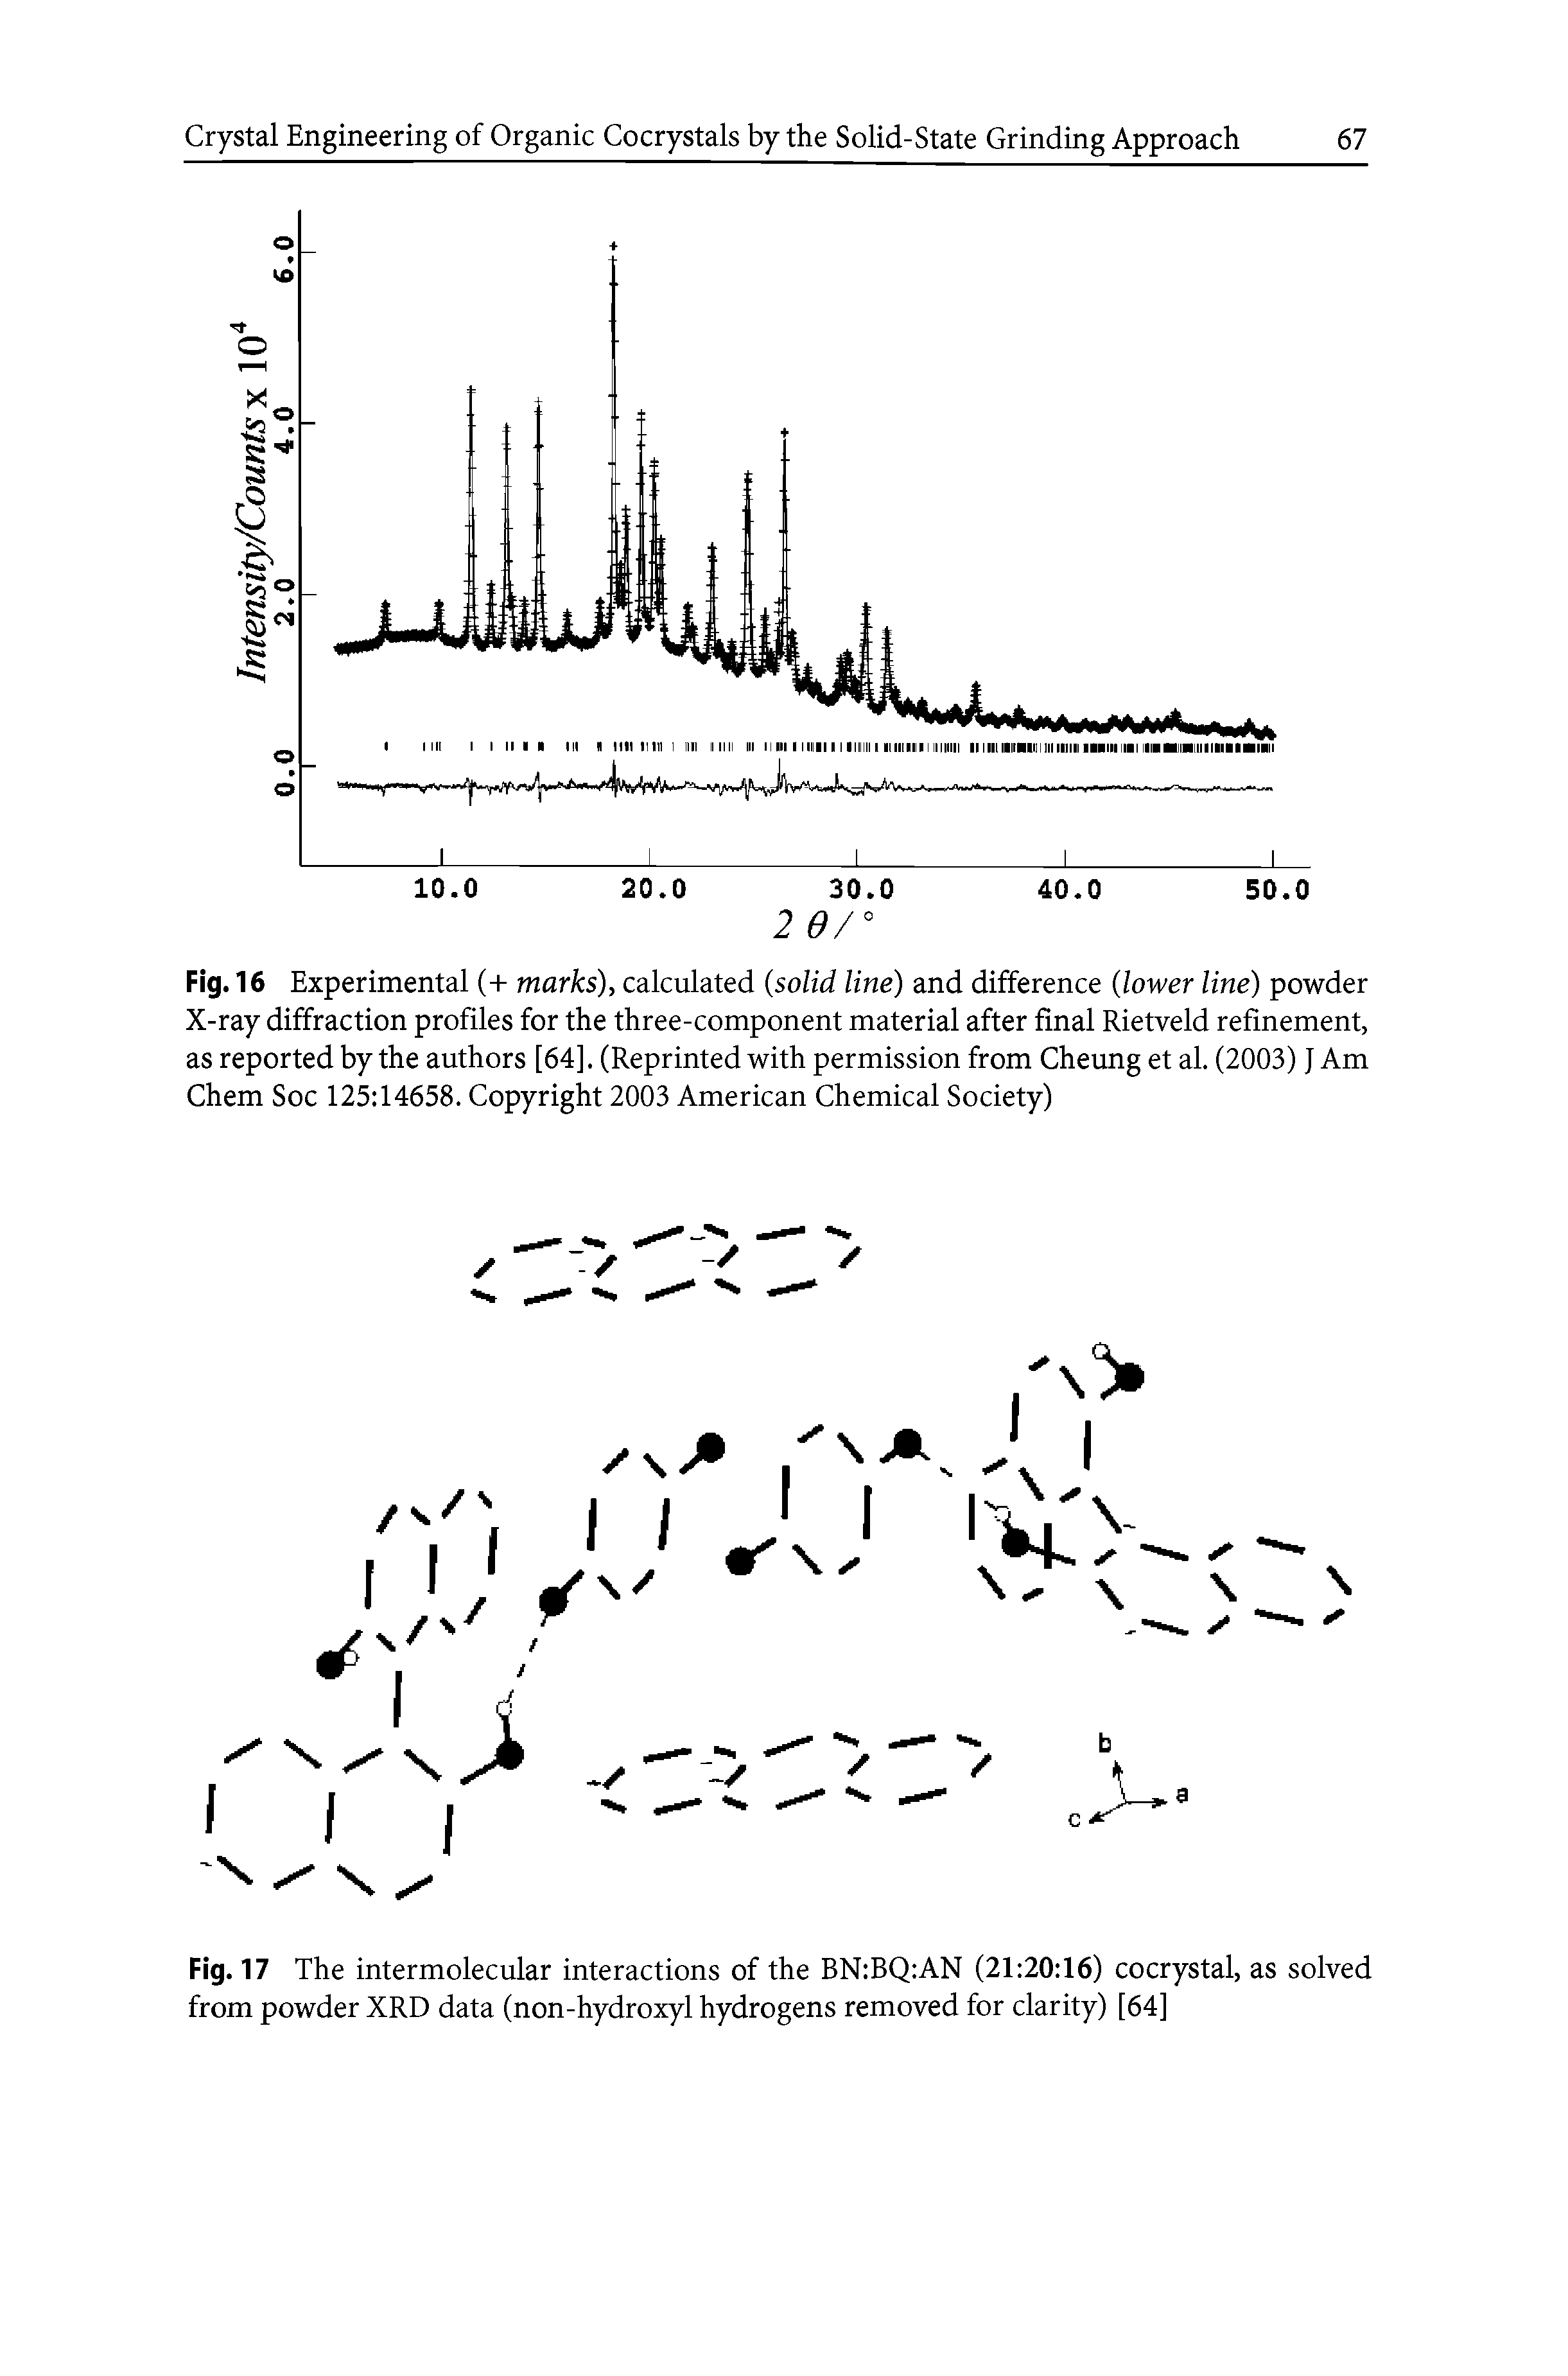 Fig. 16 Experimental (-1- marks), calculated solid line) and difference lower line) powder X-ray diffraction profiles for the three-component material after final Rietveld refinement, as reported by the authors [64]. (Reprinted with permission from Cheung et al. (2003) J Am Chem Soc 125 14658. Copyright 2003 American Chemical Society)...